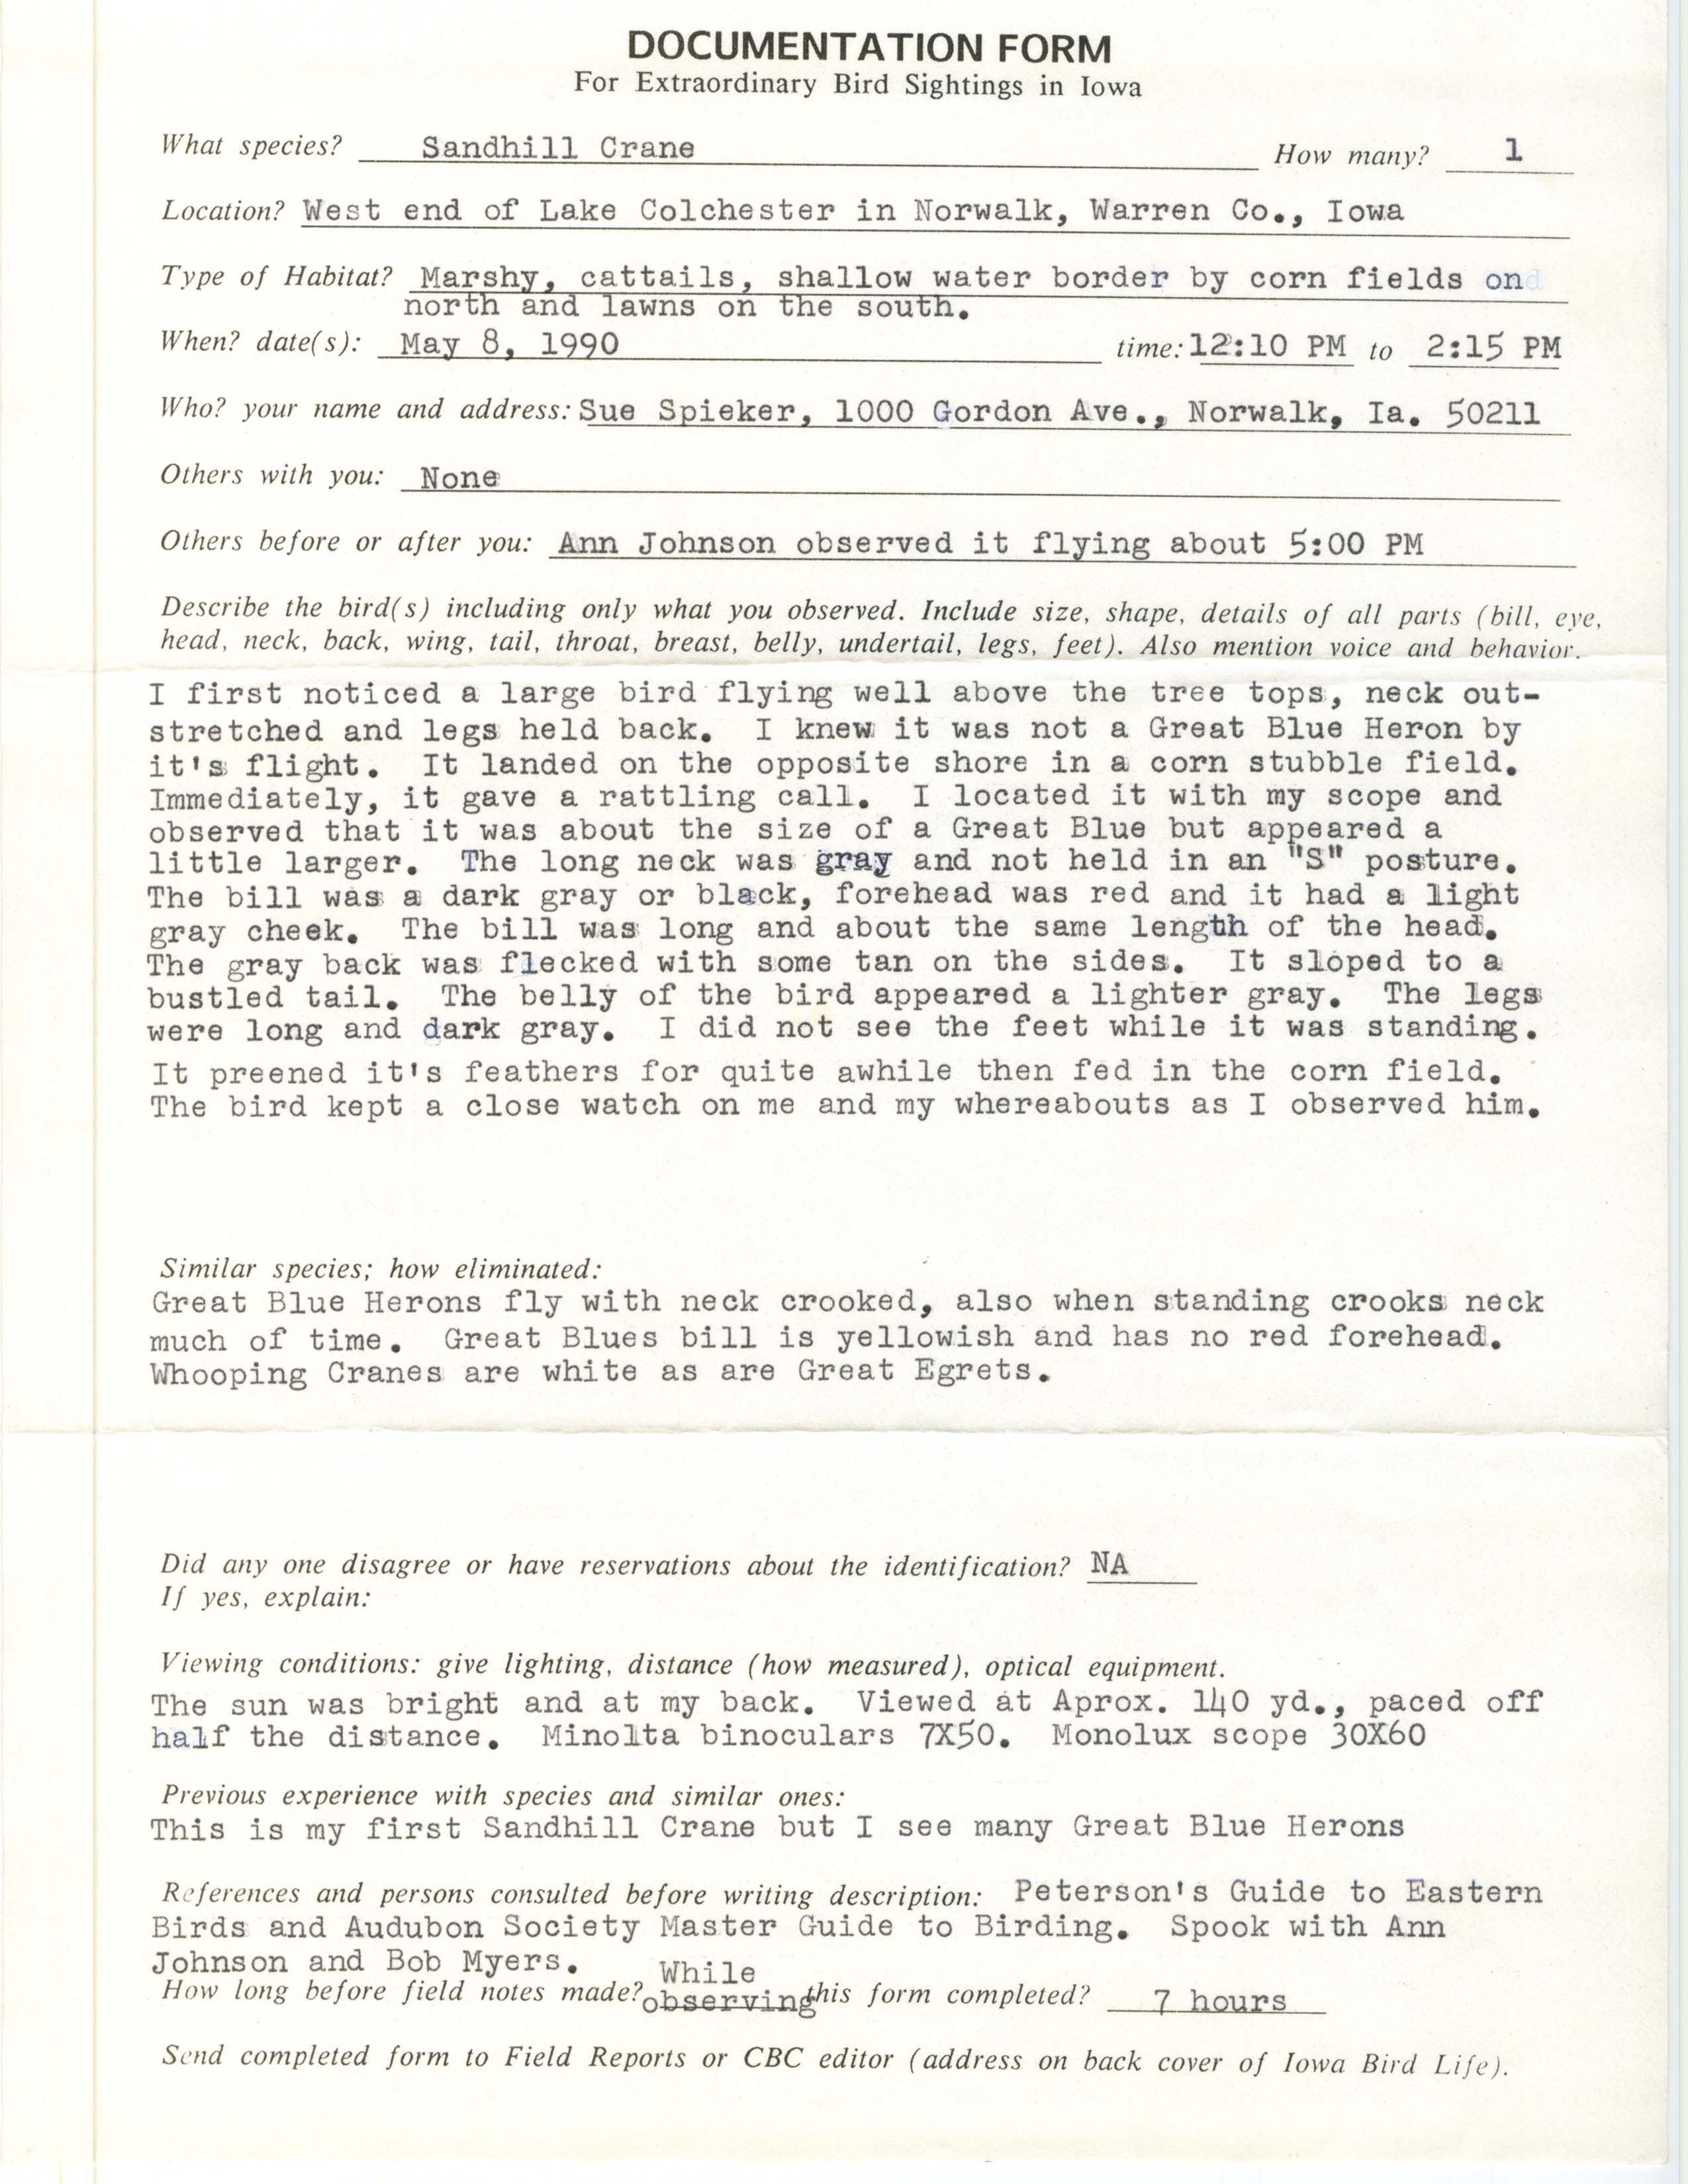 Rare bird documentation form for Sandhill Crane at west end of Lake Colechester, 1990